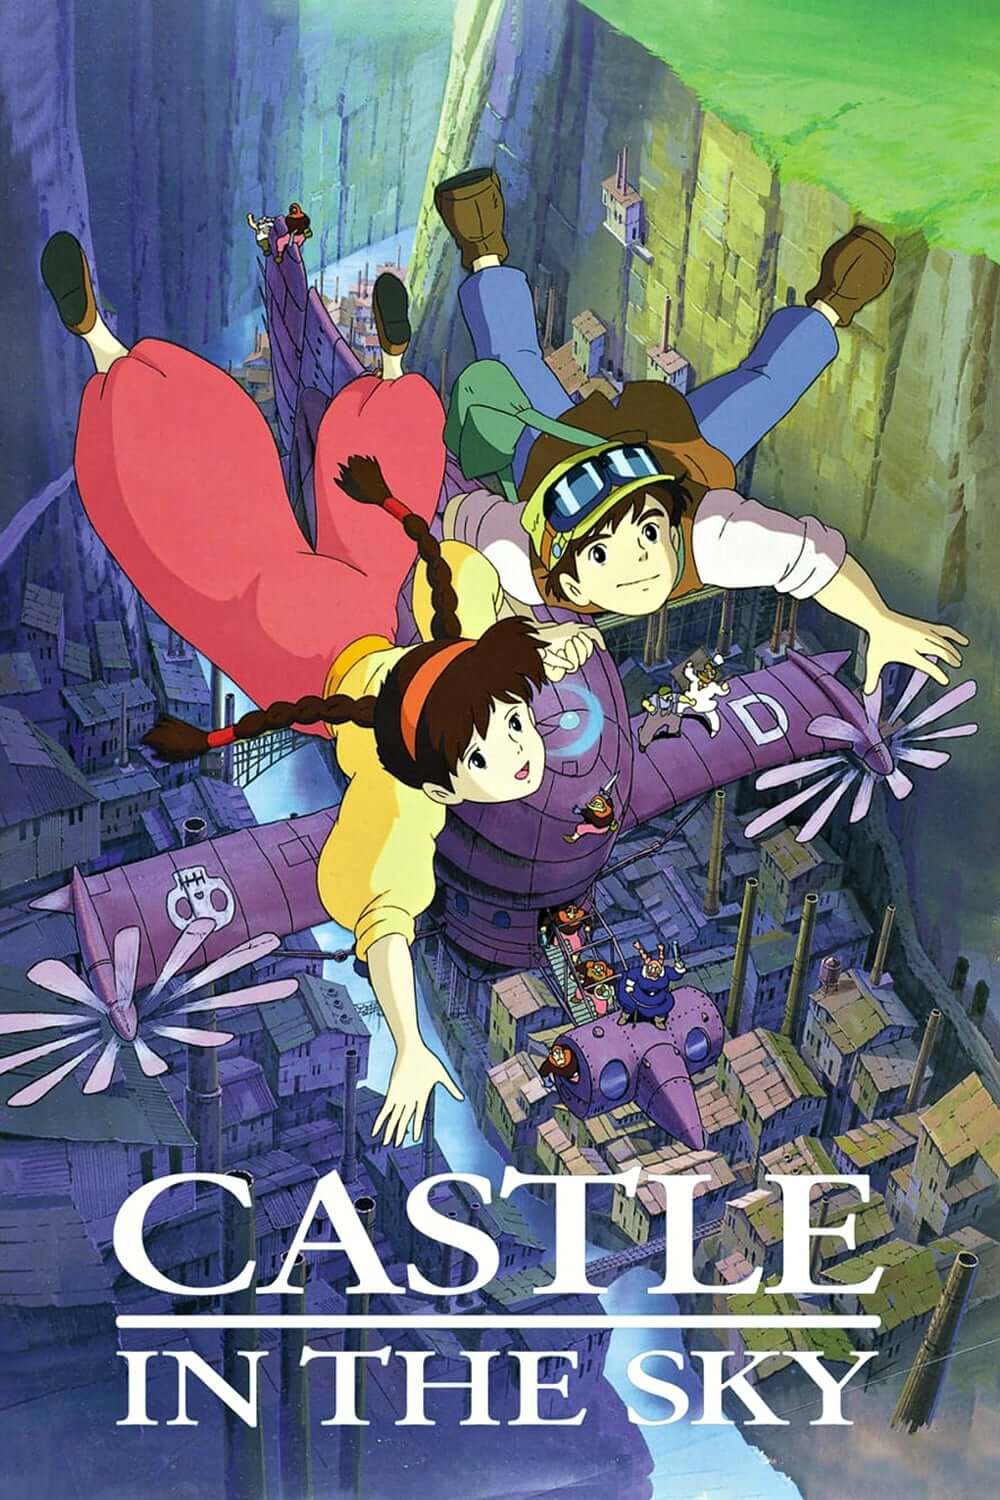 Watch Castle in the Sky, one of the best movies for 8 year olds on Netflix.